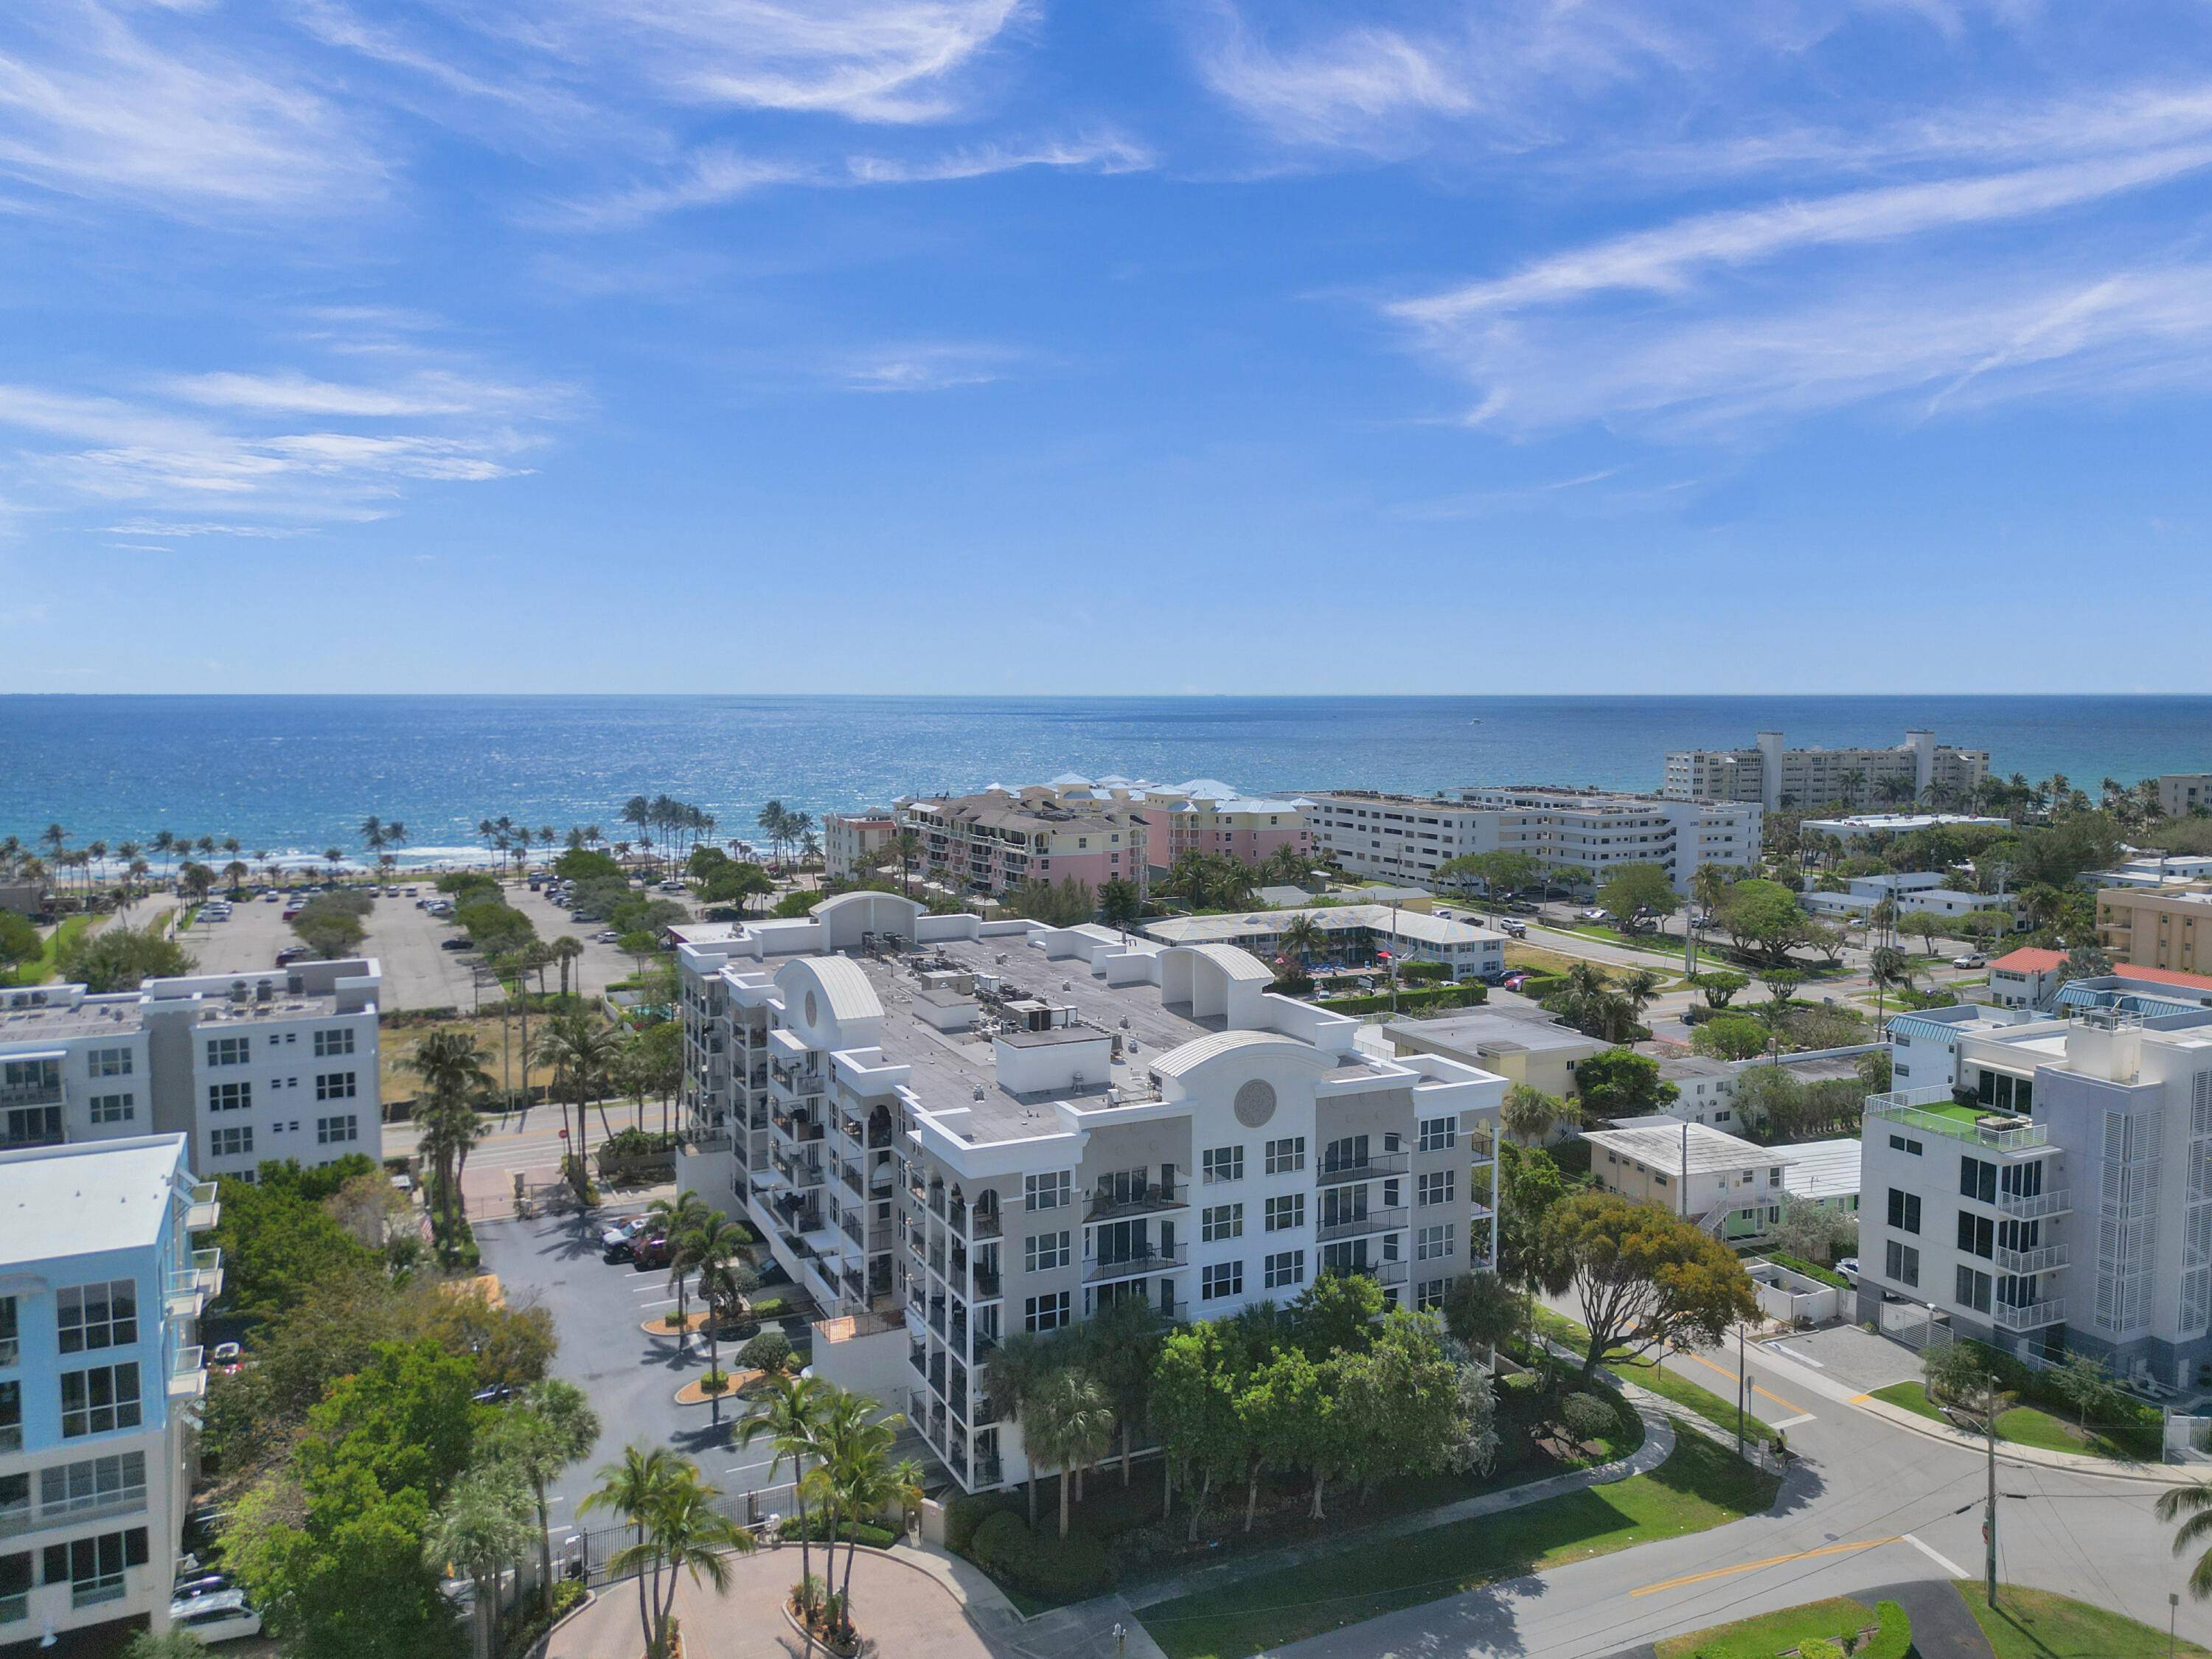 Enjoy this beautifully updated 2 bedroom, 2 bathroom, fully furnished condo in the heart of Deerfield Beach just steps to shopping, restaurants, award winning beaches and more.